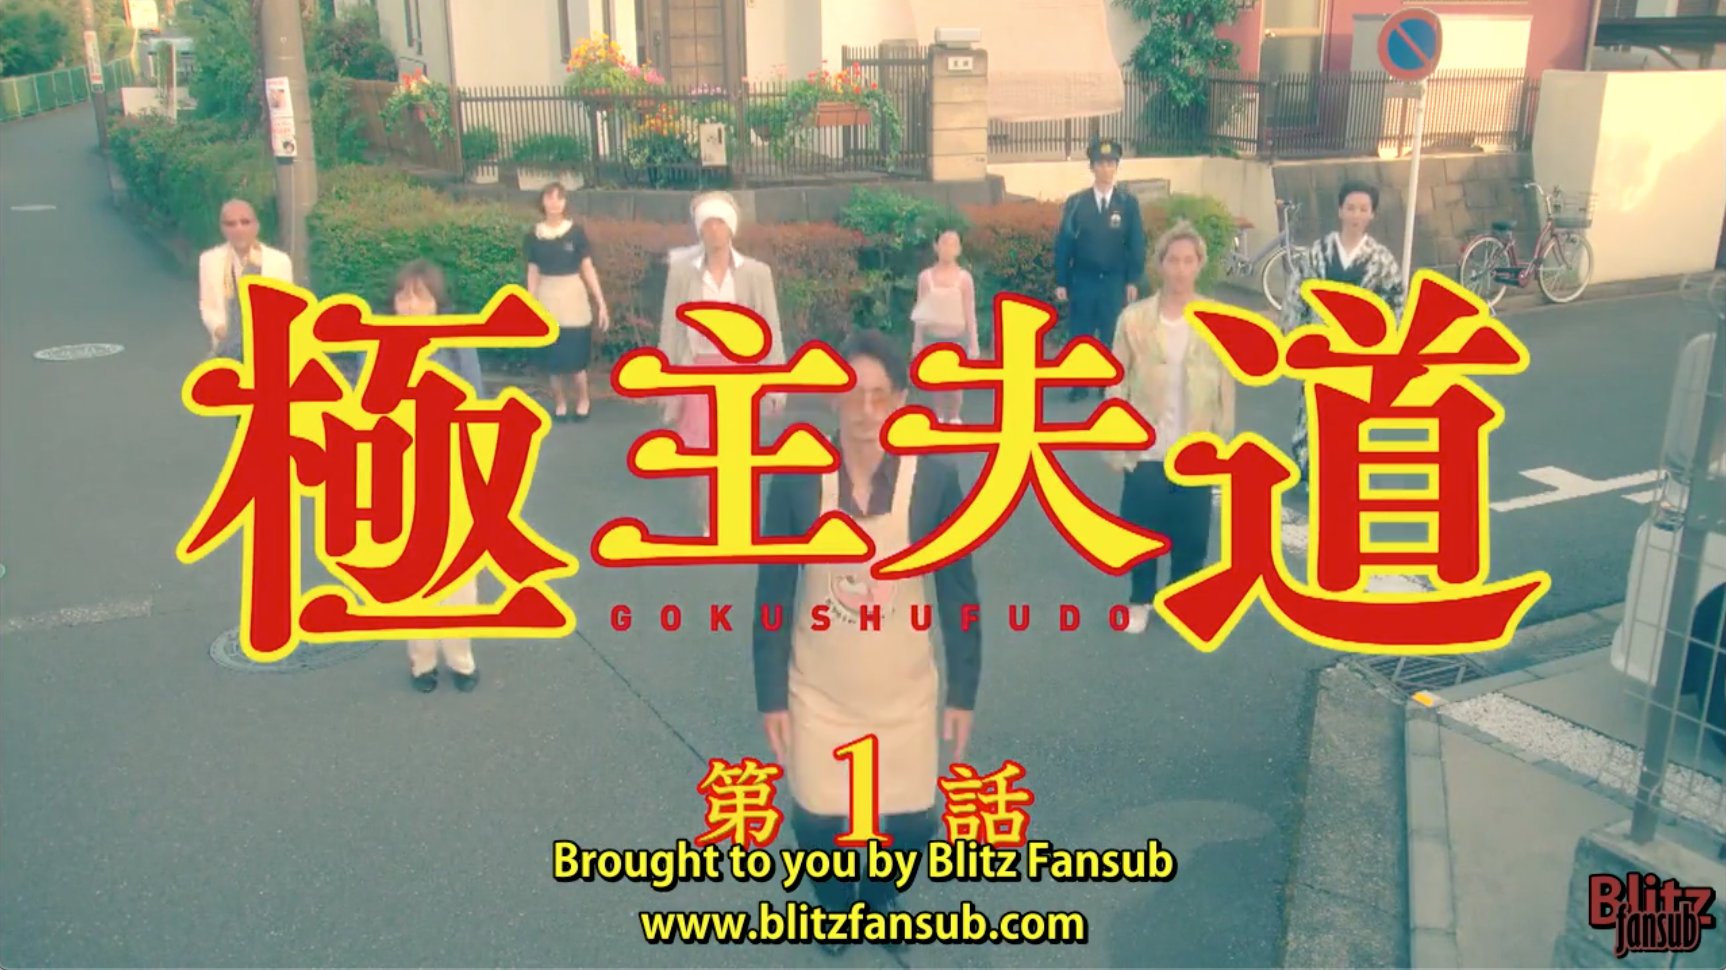 Sailor Moon Livetweet Funny Display Name I M Delighted To Review Episode 1 Of Gokushufudo Way Of The Househusband Live Action Drama The Epic Tale Of A Crimelord Turned Stay At Home